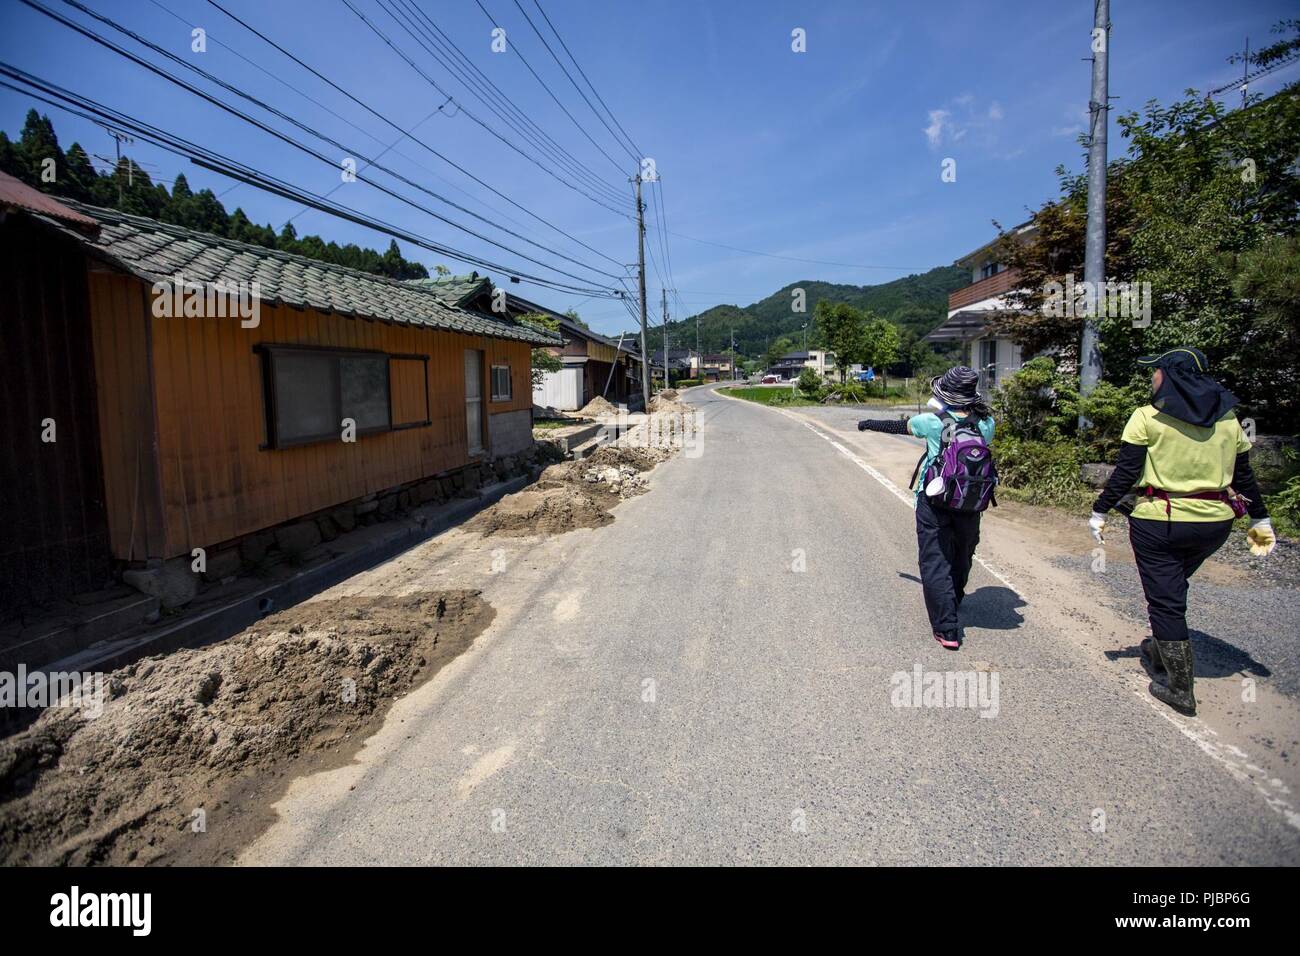 Yasue Fuki and Tomomi Haratani, master labor contractors from Marine Corps Air Station (MCAS) Iwakuni, walk toward a clean up site during a volunteer event in Shuto Town, Iwankuni City, Japan, July 13, 2018. The volunteer event, organized by the Marine Corps Community Services Single Marine Program, provided service members with the opportunity to help local Japanese residents clean up and recover after the area was flooded by excessive rainfall. Stock Photo